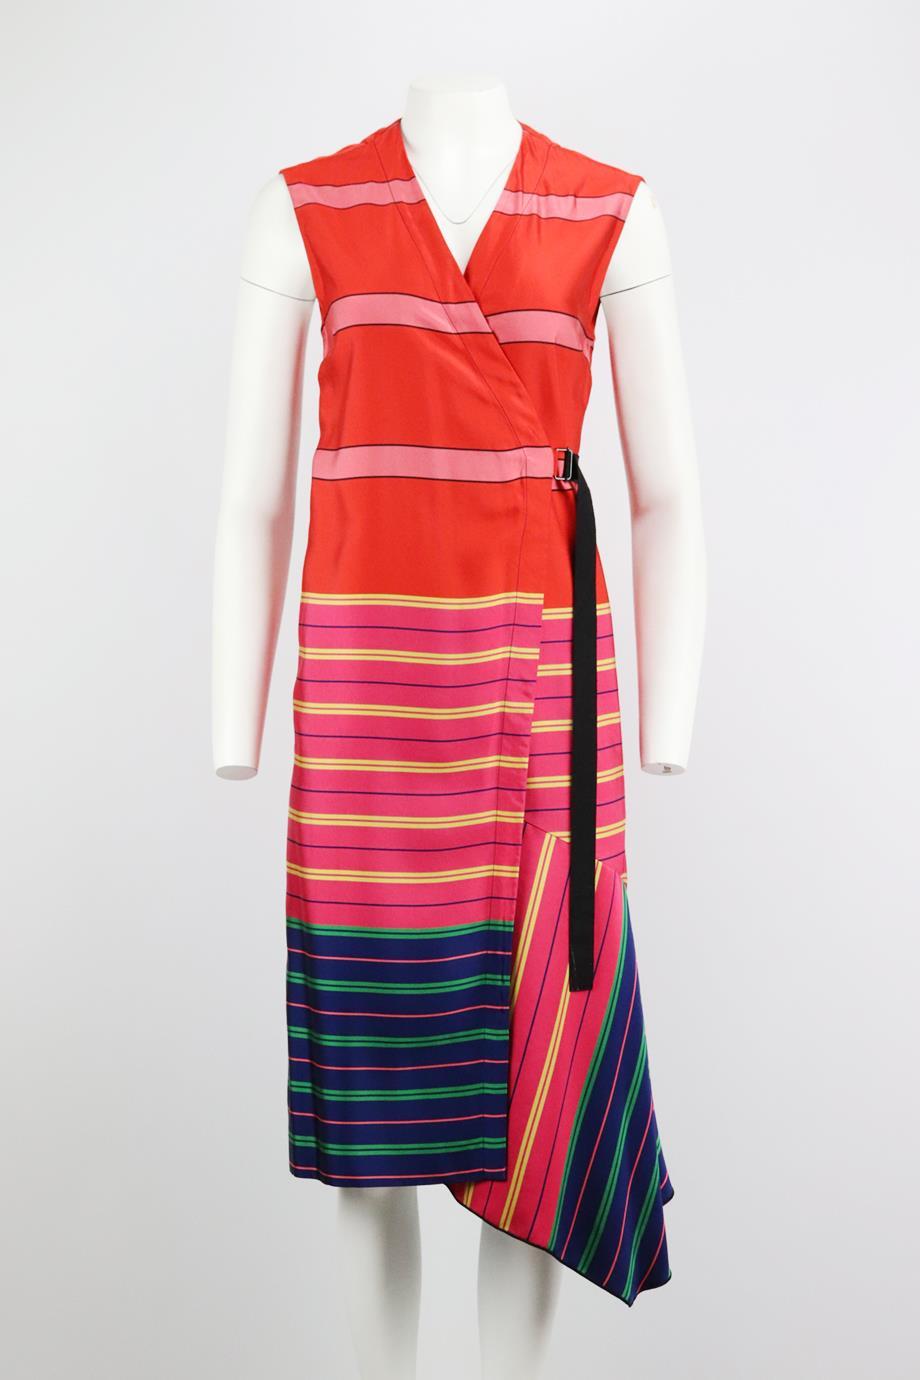 Dries Van Noten striped twill wrap dress. Multicoloured. Sleeveless, v-neck. Tie fastening at side. 100% Viscose. Size: FR 36 (UK 8, US 4, IT 40). Bust: 36 in. Waist; 36 in. Hips: 36 in. Length: 42 in. Very good condition - No sign of wear; see